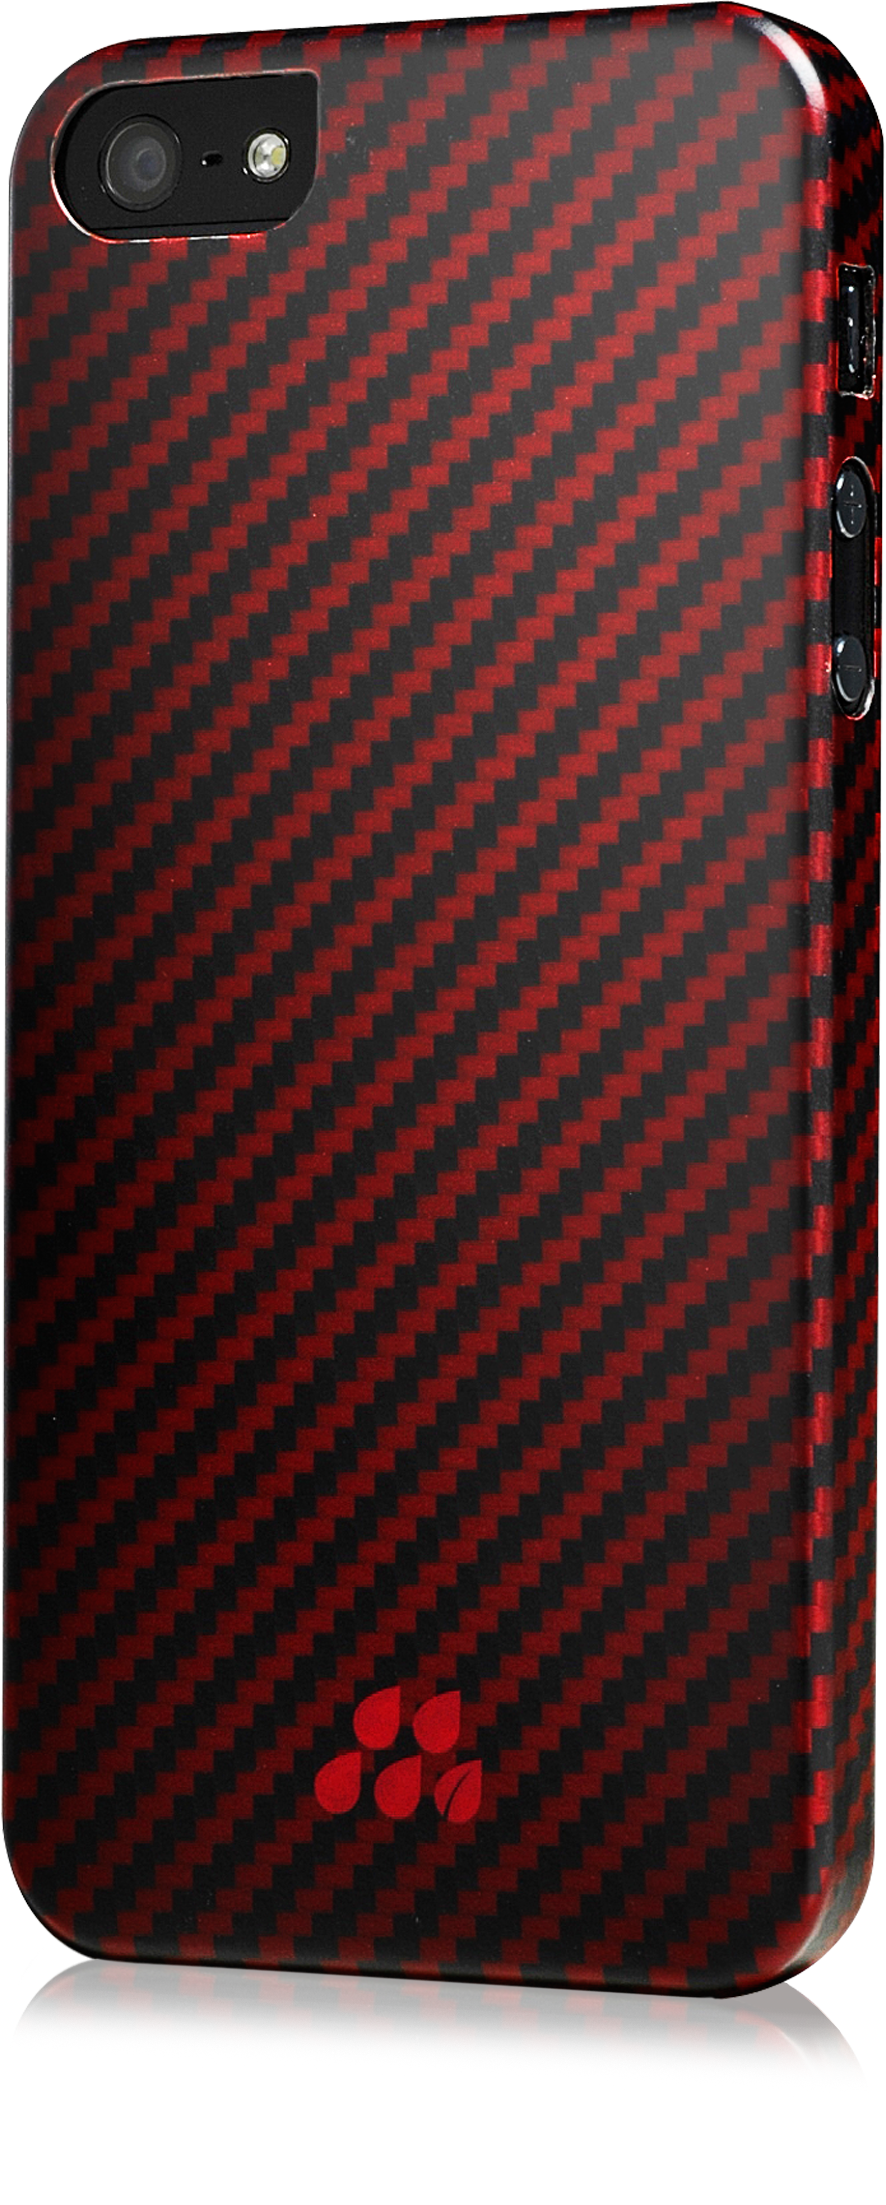 Evutec Karbon Series in Red and Black for iPhone 5